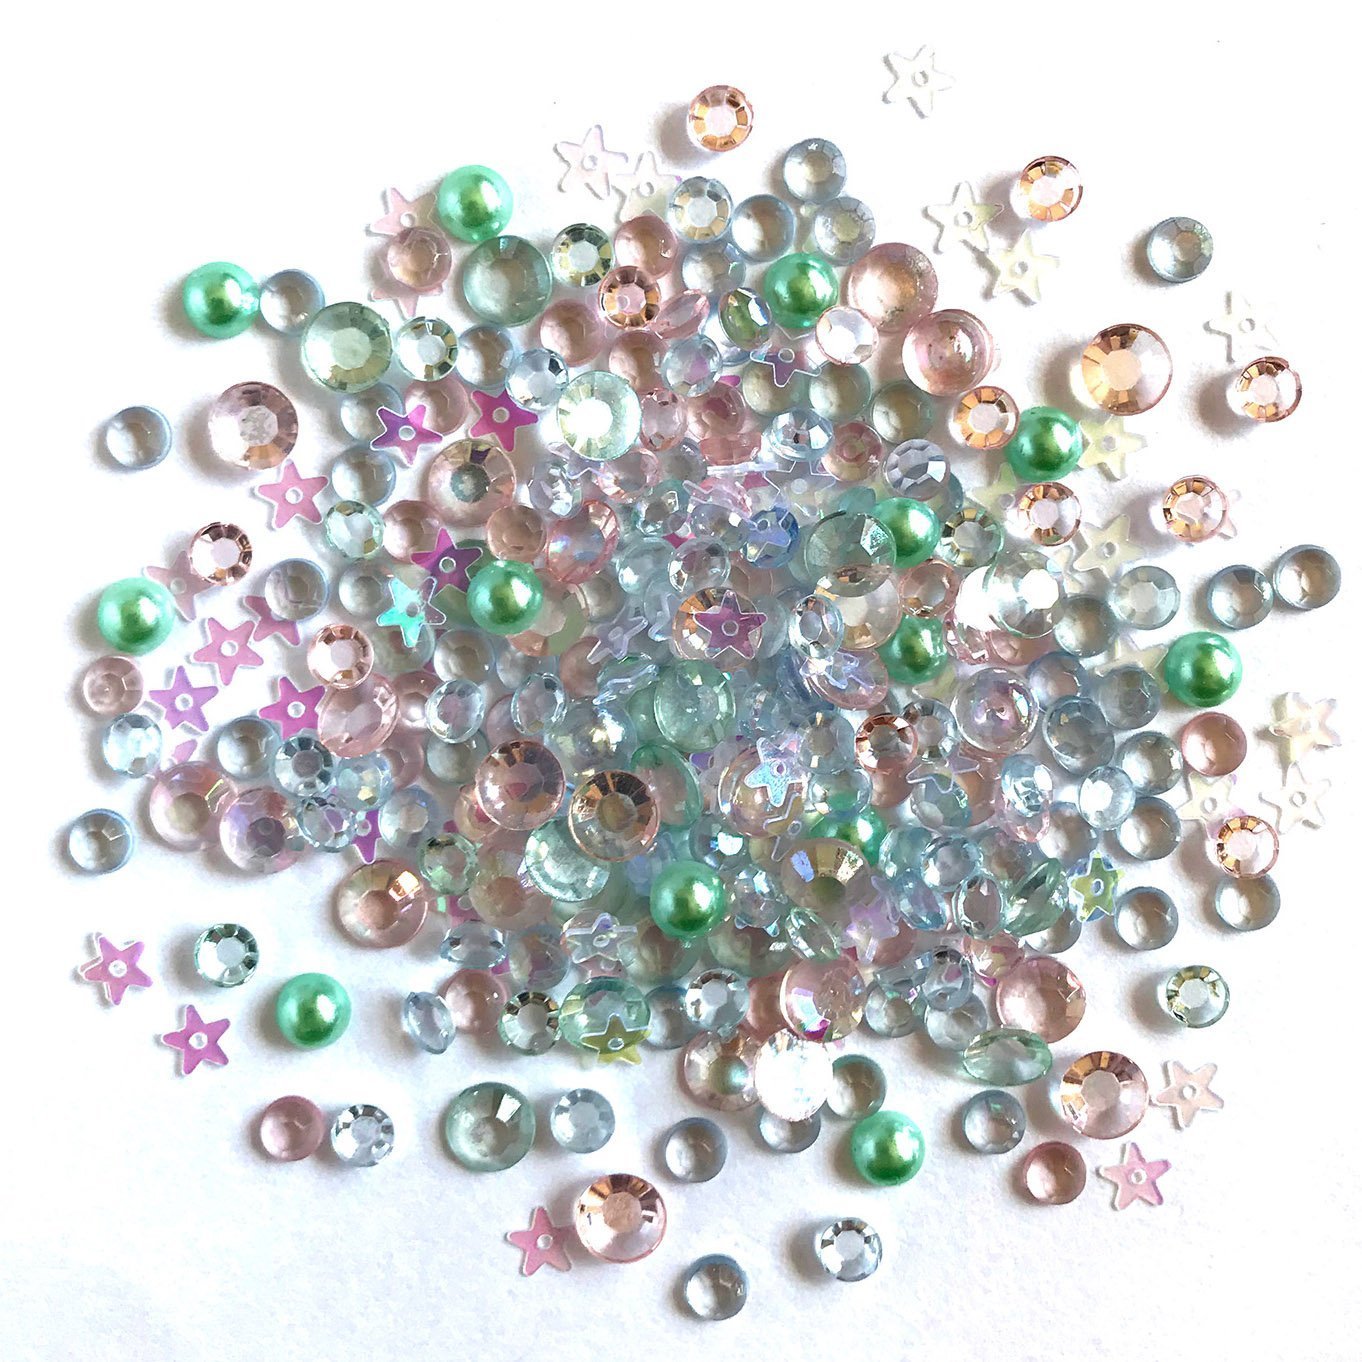  Rhinestone Buttons AB Clear Crystal Buttons, Flat Back